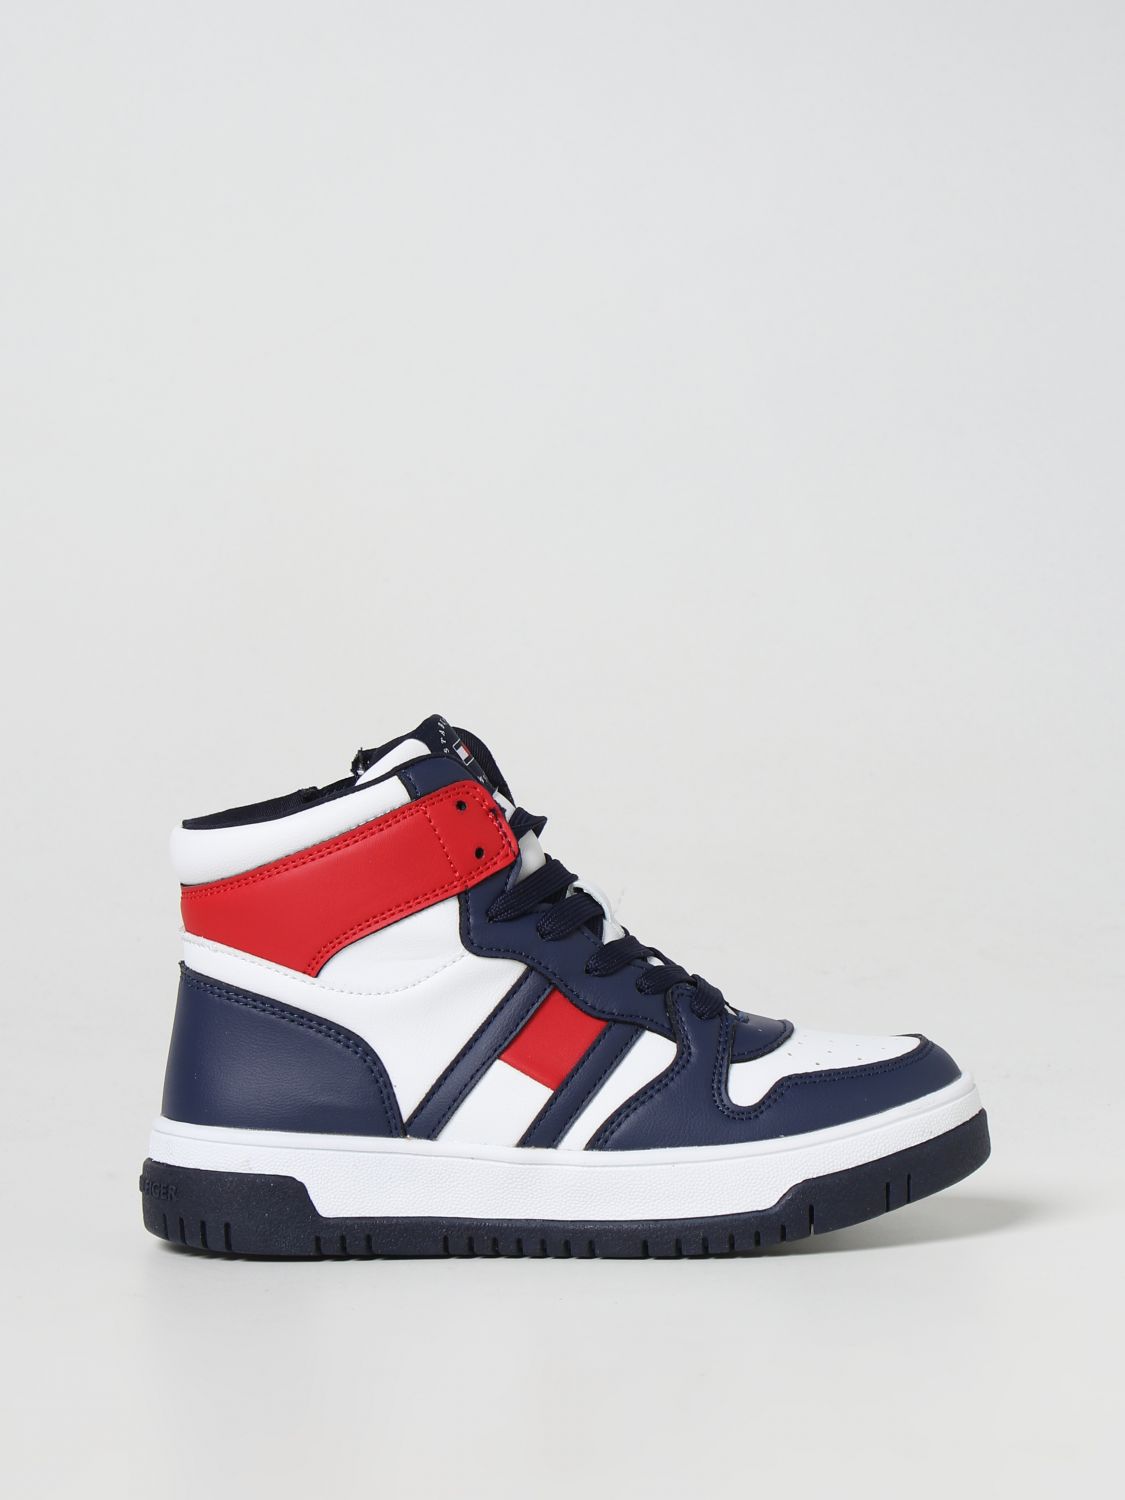 TOMMY HILFIGER: shoes for boys | Tommy Hilfiger shoes T3B9324861351 online at GIGLIO.COM